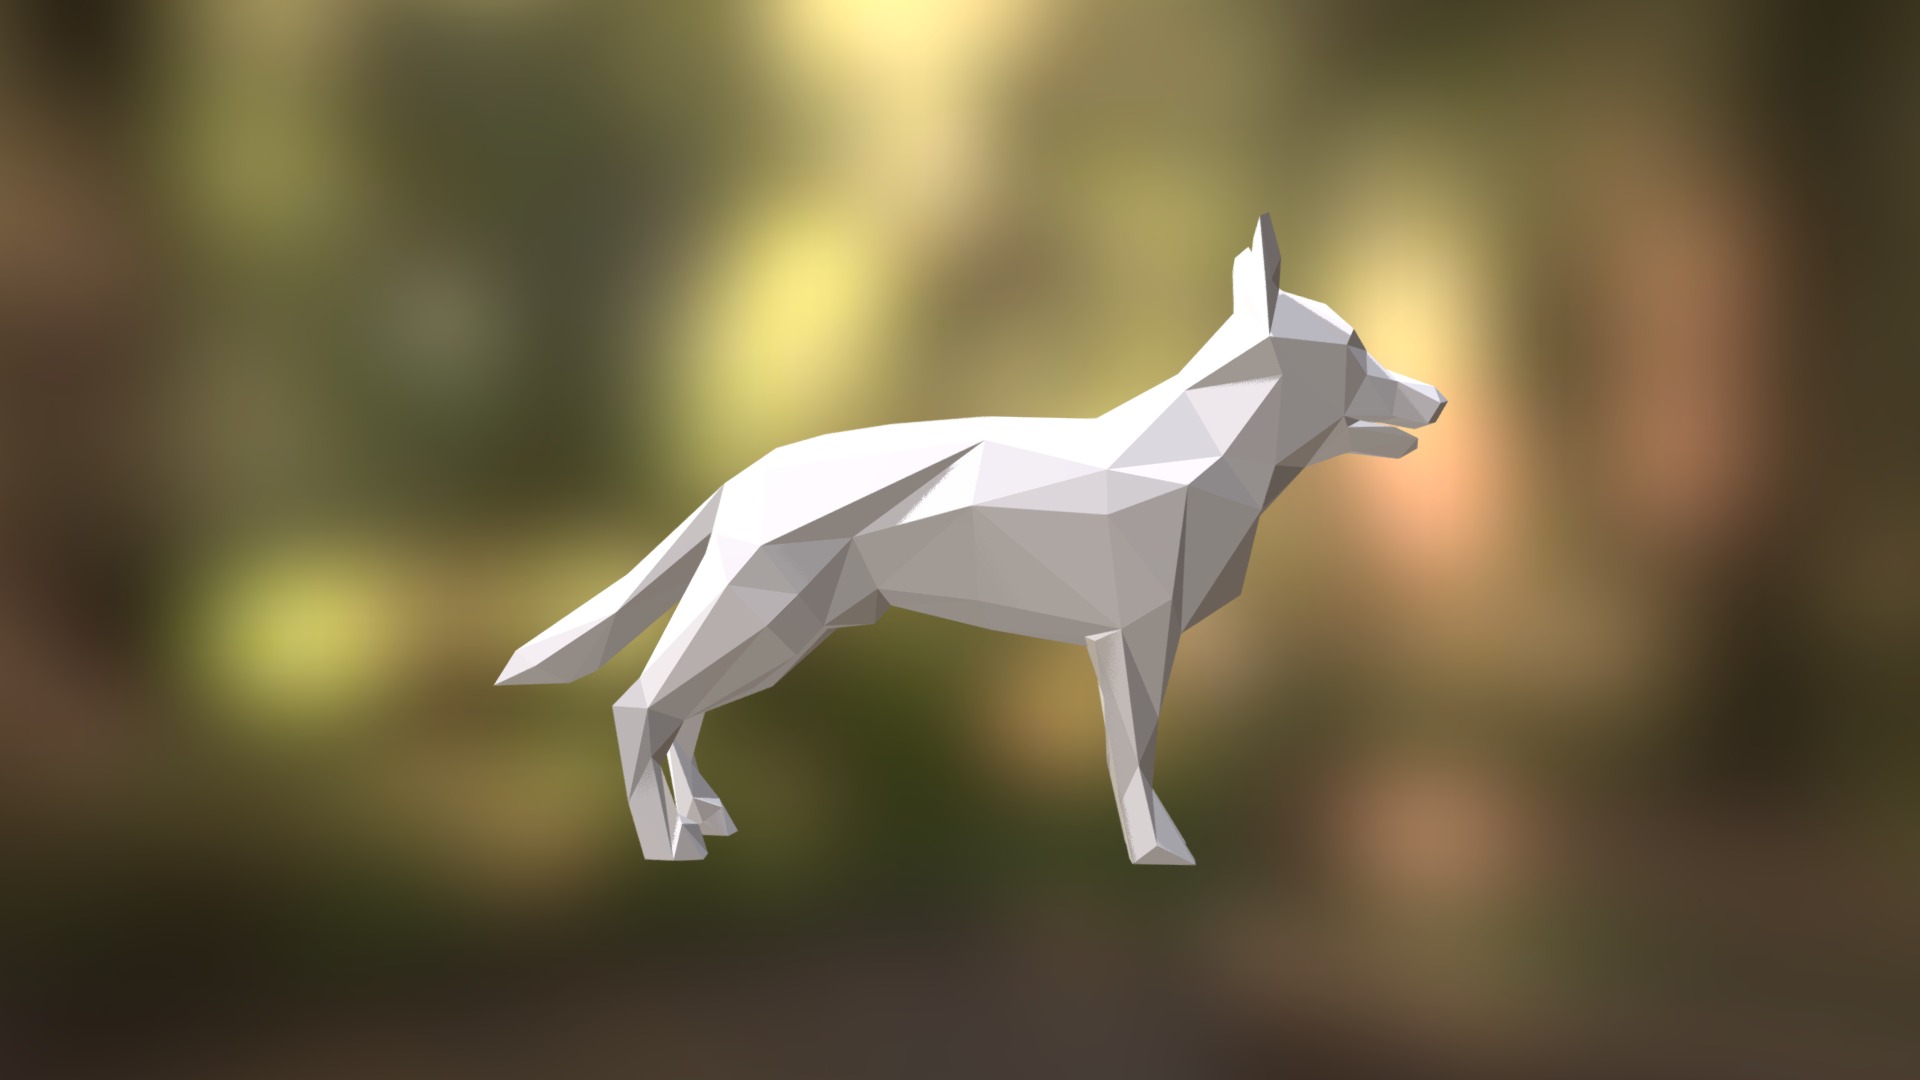 Low Poly 3D model for 3D printing. Cat Low Poly sculpture. You can find this model for 3D printing in my shop: -link removed- Reference model: http://www.cadnav.com - German Shepherd low poly model for 3D printing - 3D model by Peolla3D 3d model